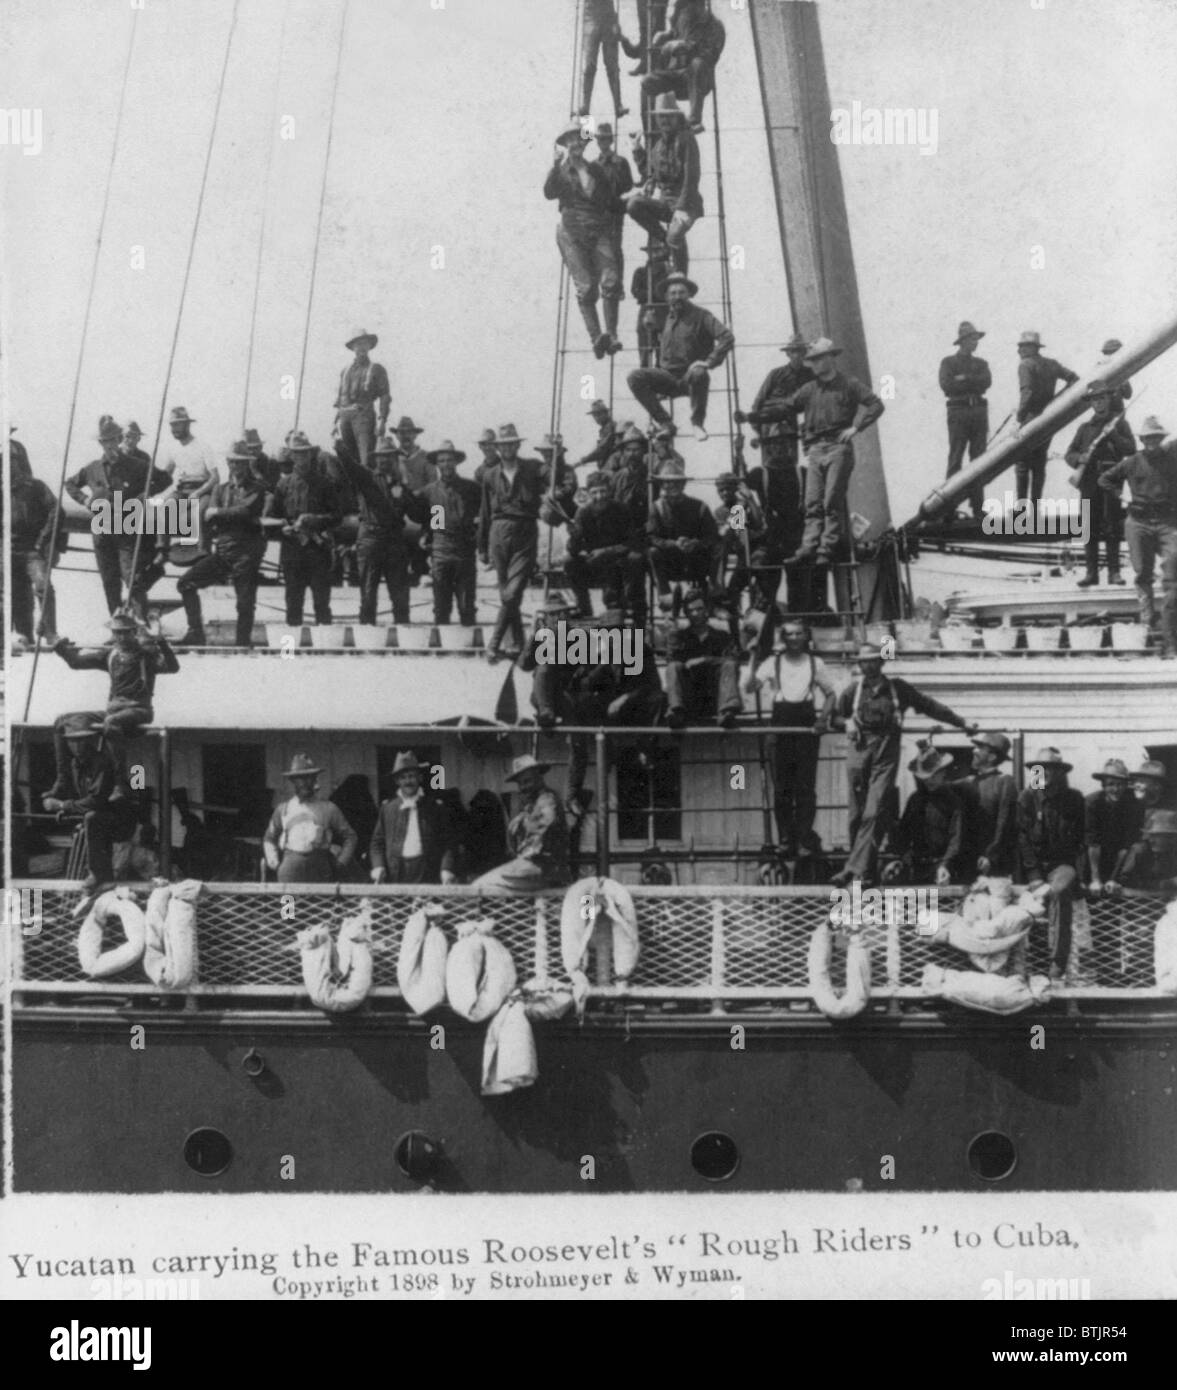 During the Spanish American War, the ship, the USS YUCATAN, carries Roosevelt's 'Rough Riders' to Cuba. Men line decks and rigging, 1898 Stock Photo